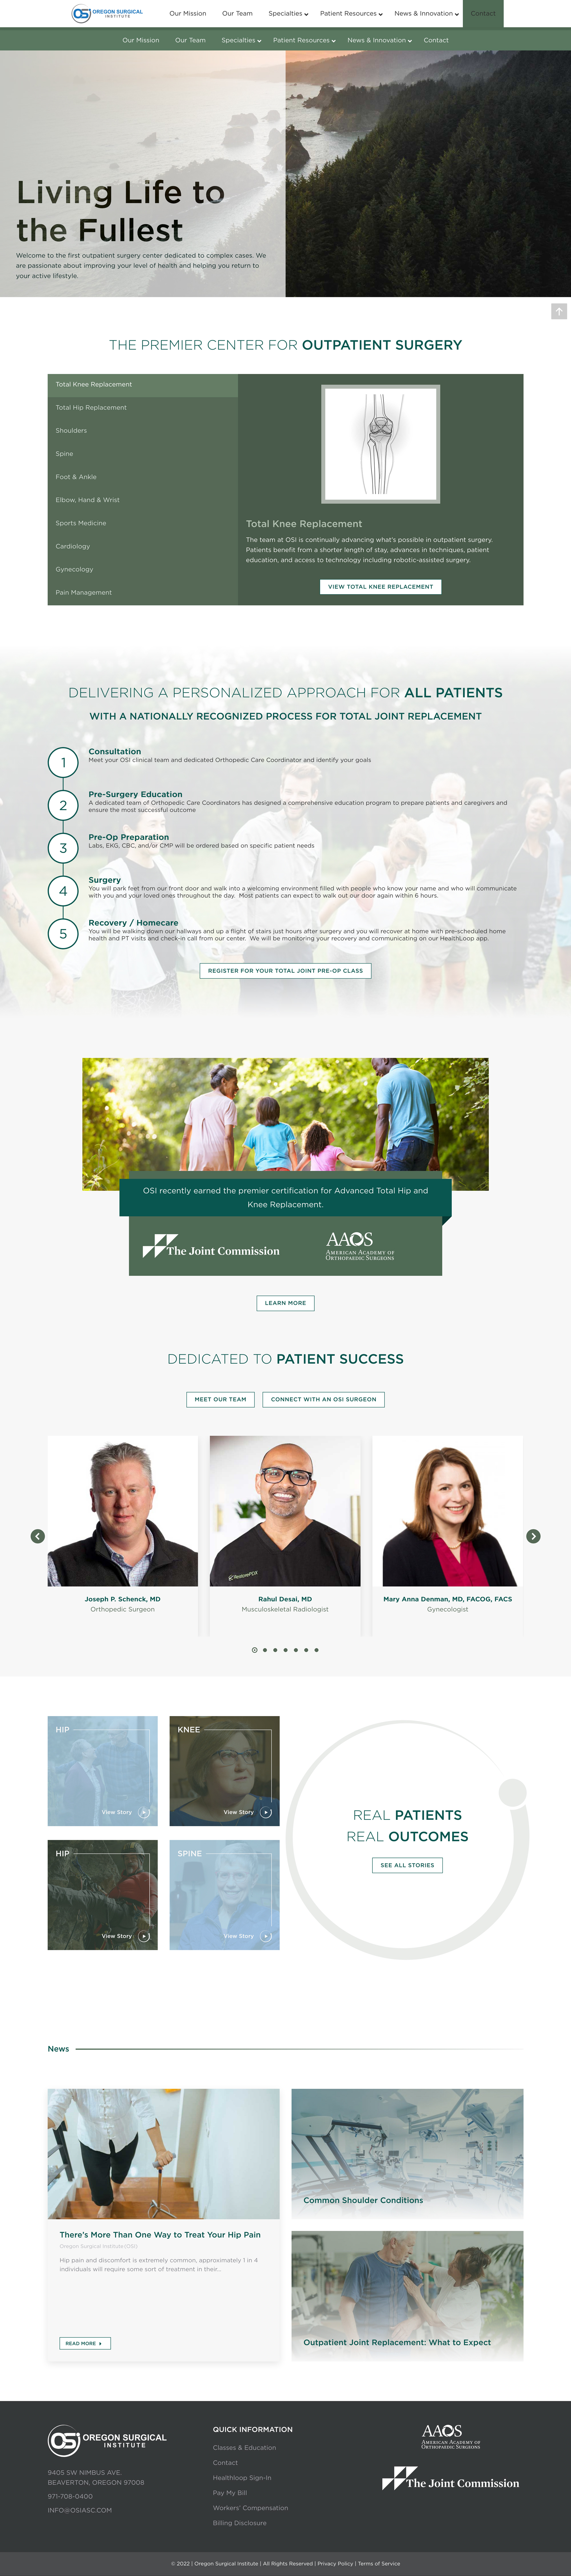 Oregon Surgical Institute Homepage